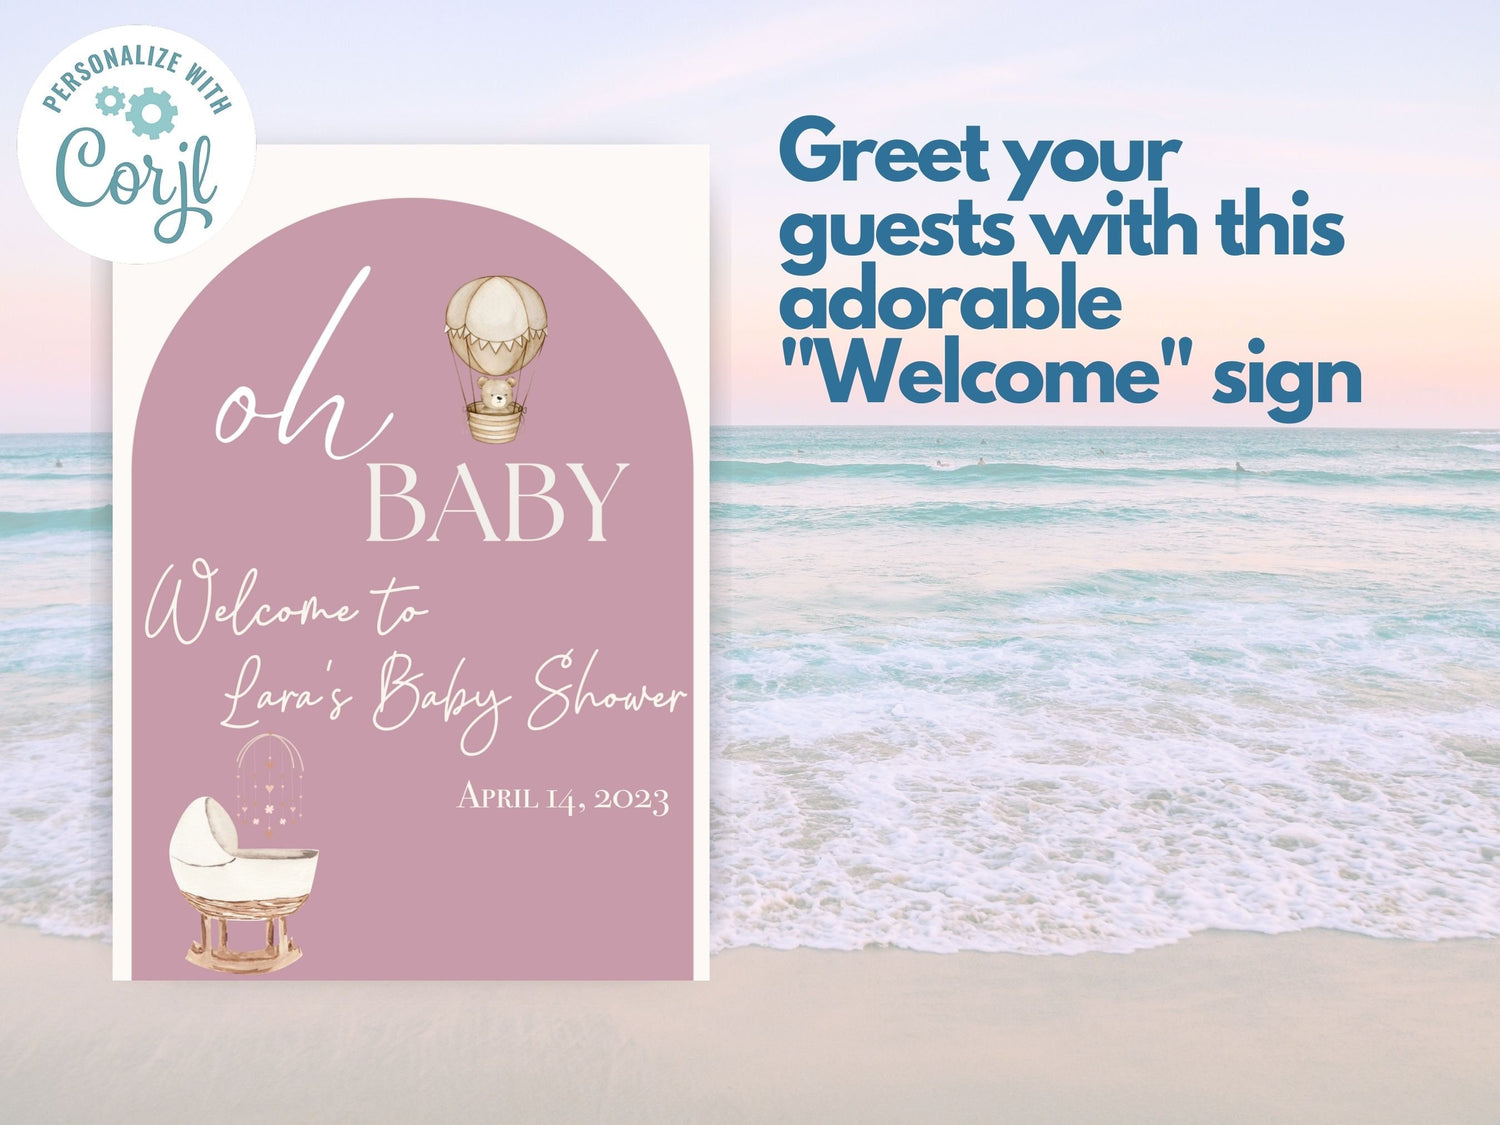 Get a warm welcome with Courtney Welcome Sign